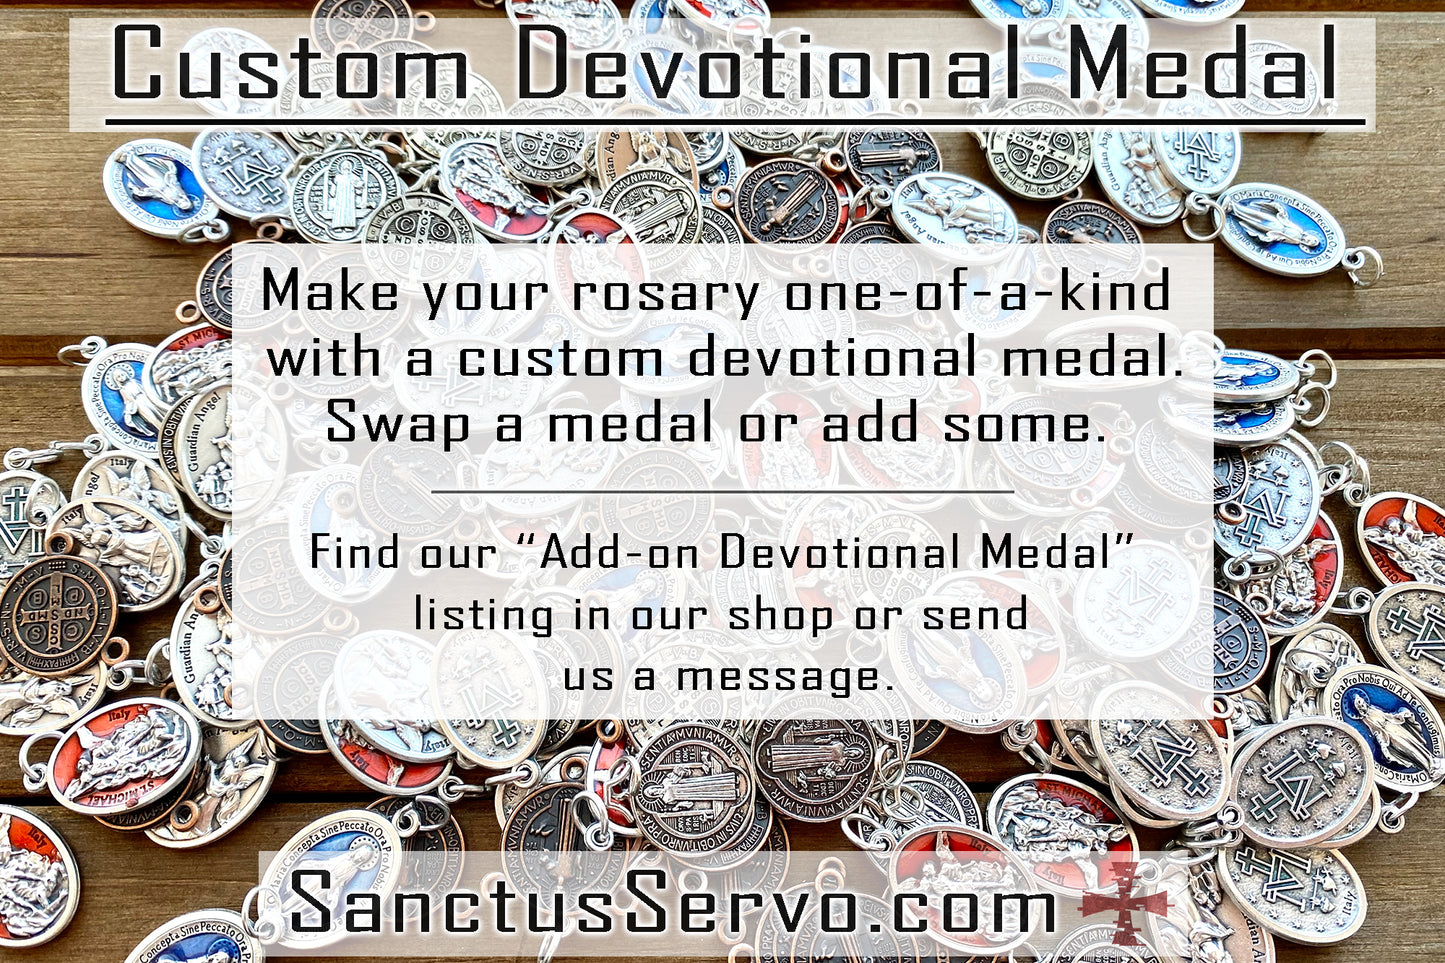 A custom devotional medal can be purchased and added to any rosary purchased from Sanctus Servo.